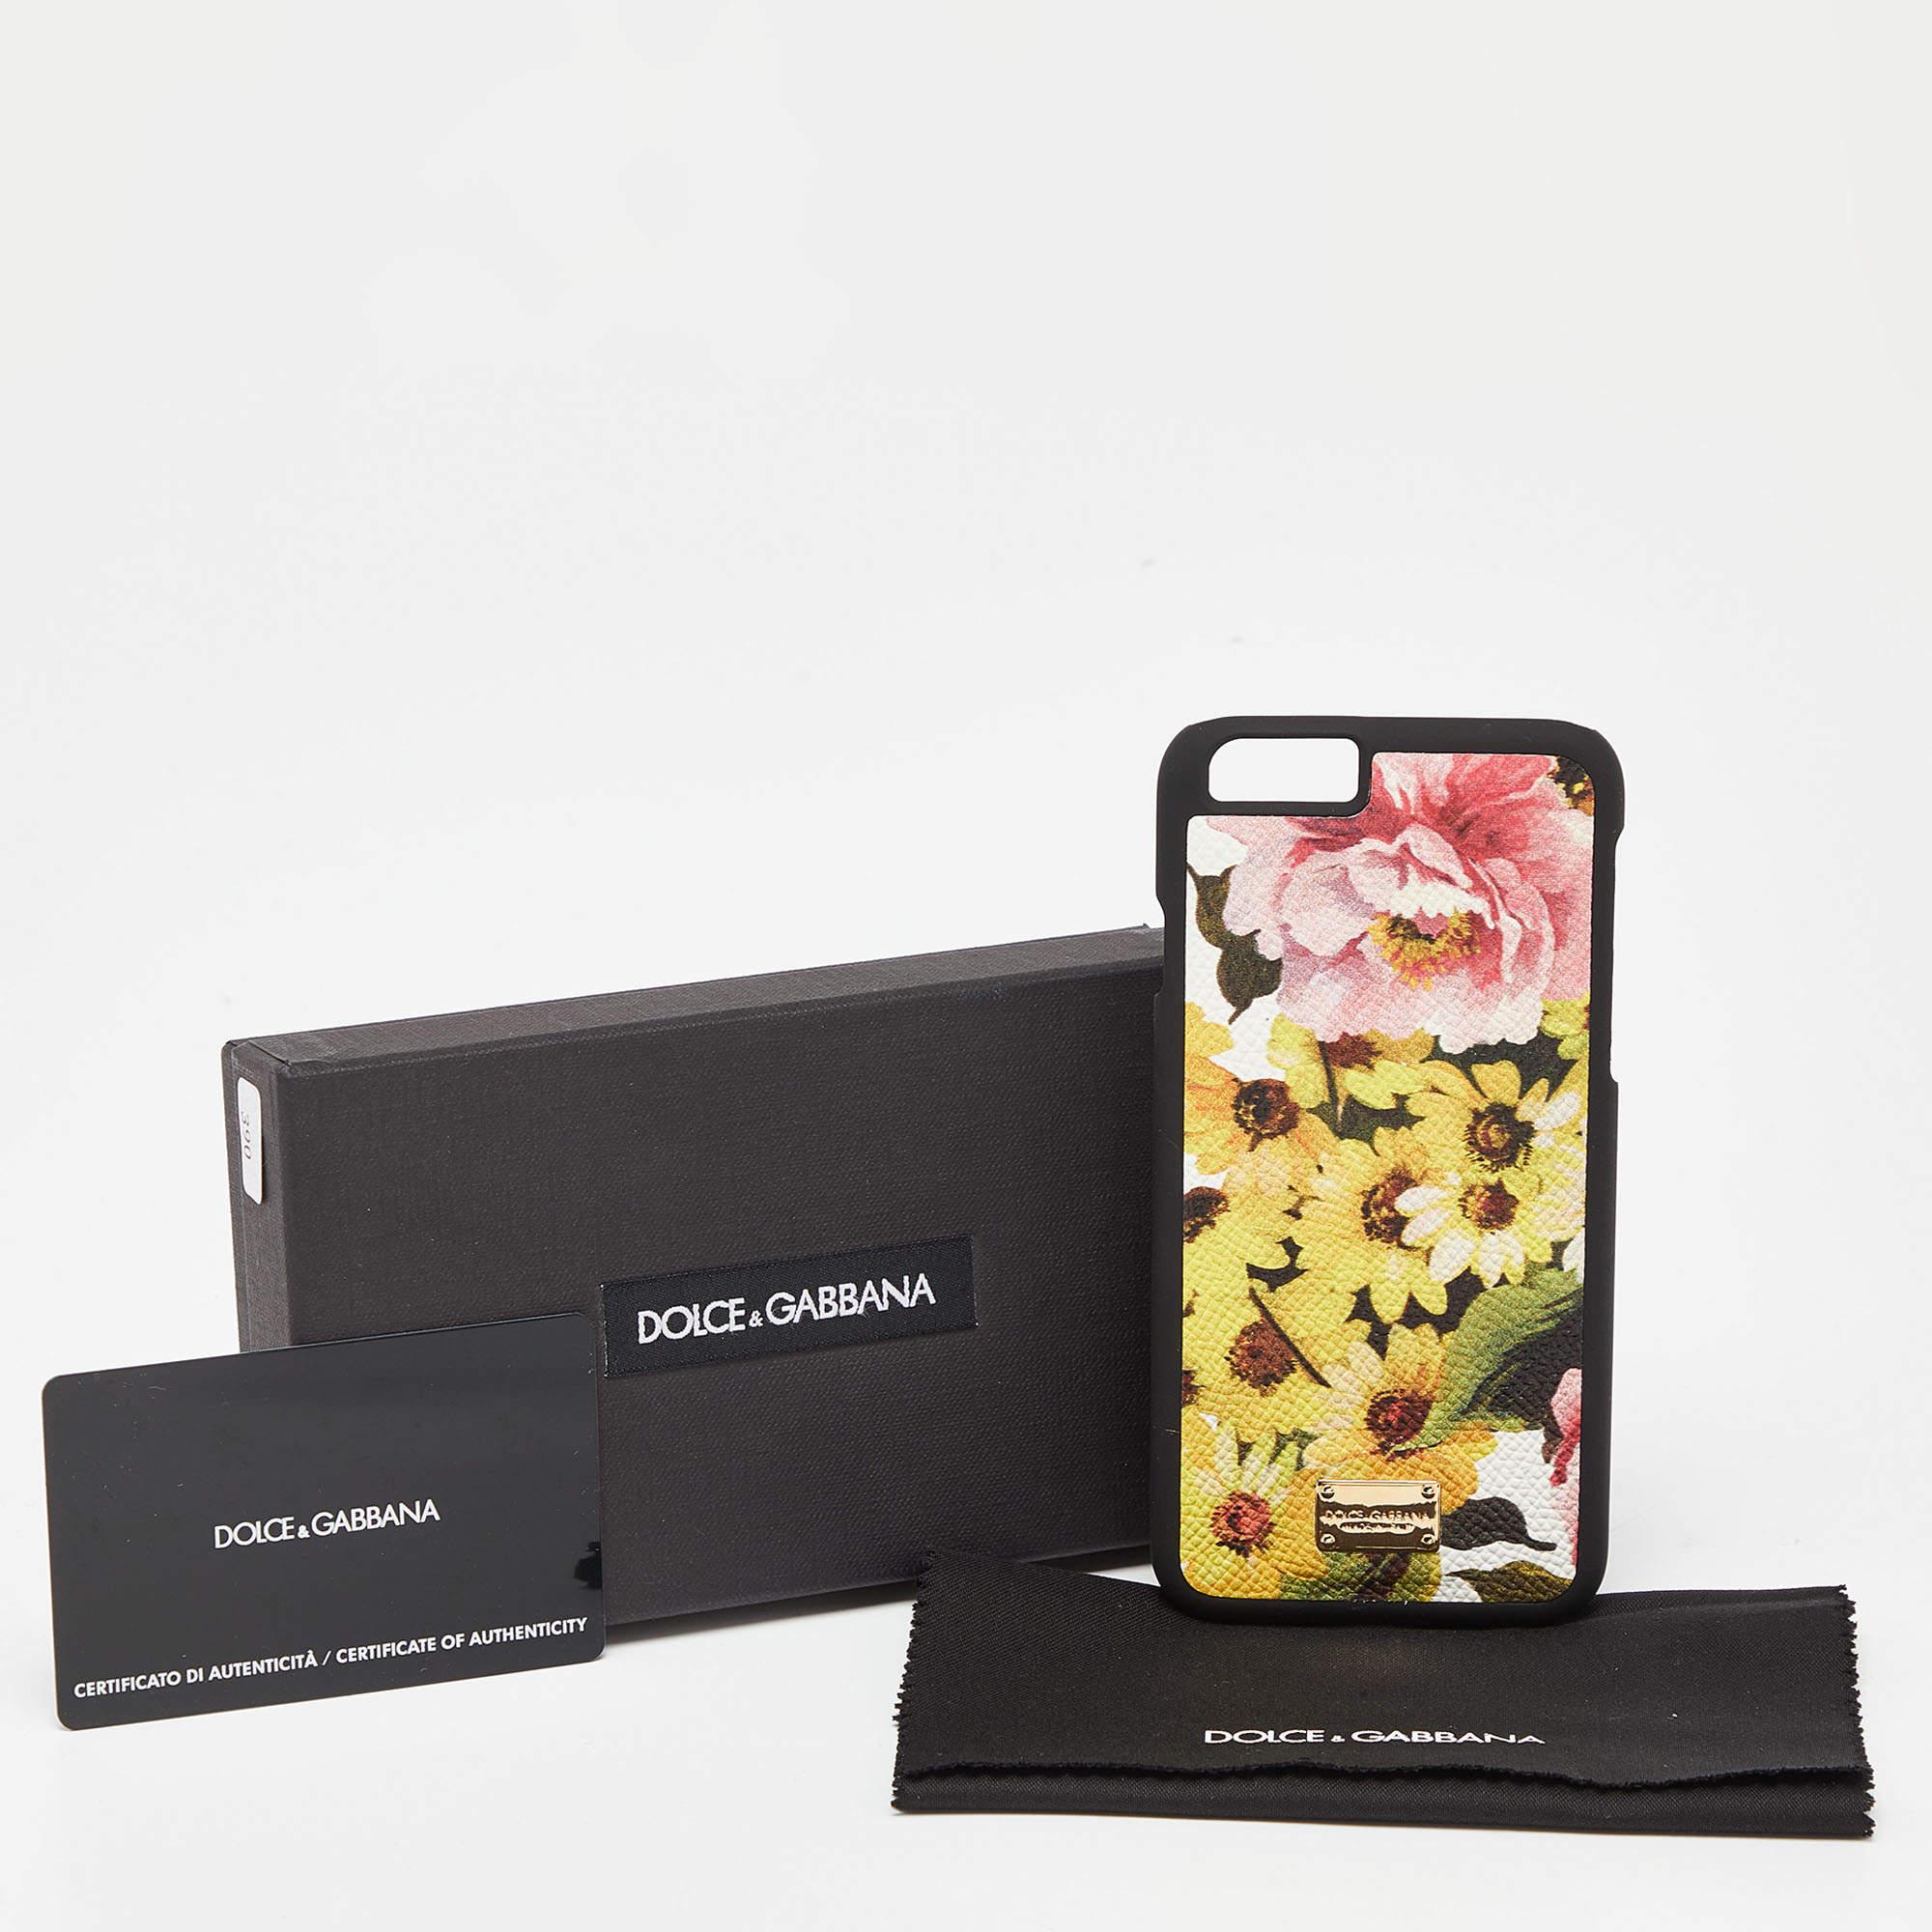 Dolce & Gabbana Multicolor Floral Print Leather iPhone 6 Case For Sale 6